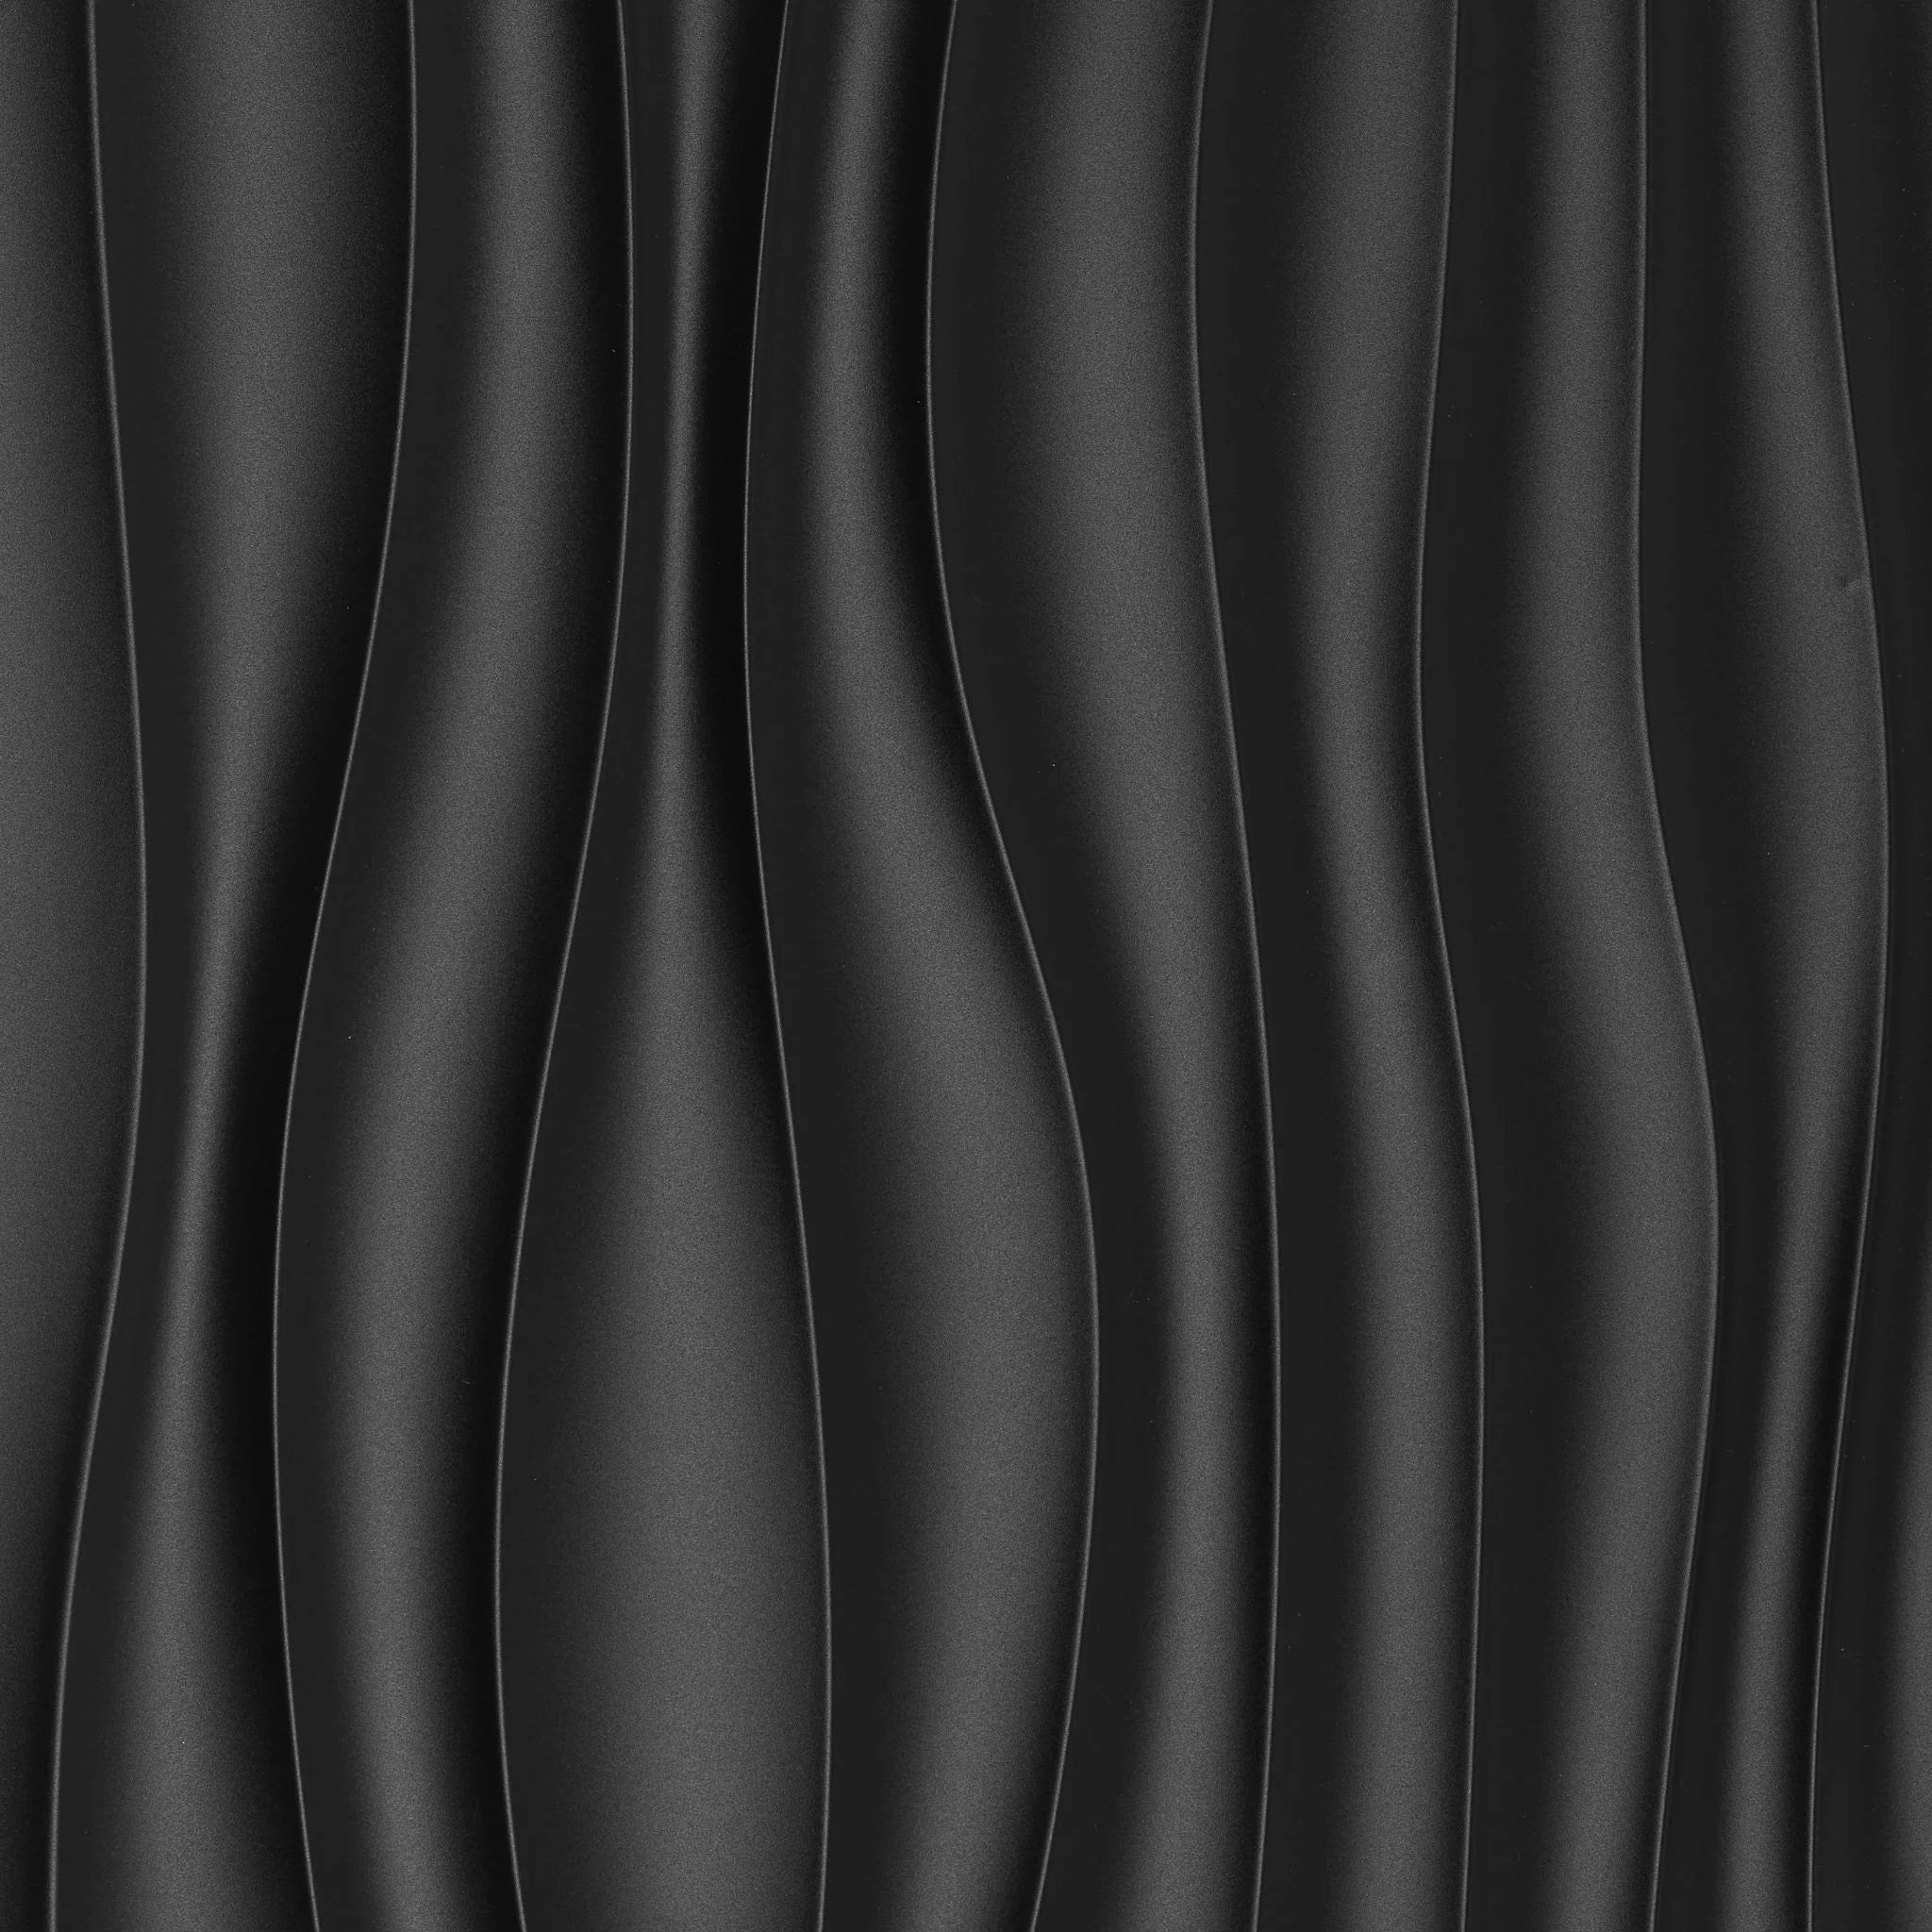 Close-up of black PVC wall panel with wavy pattern